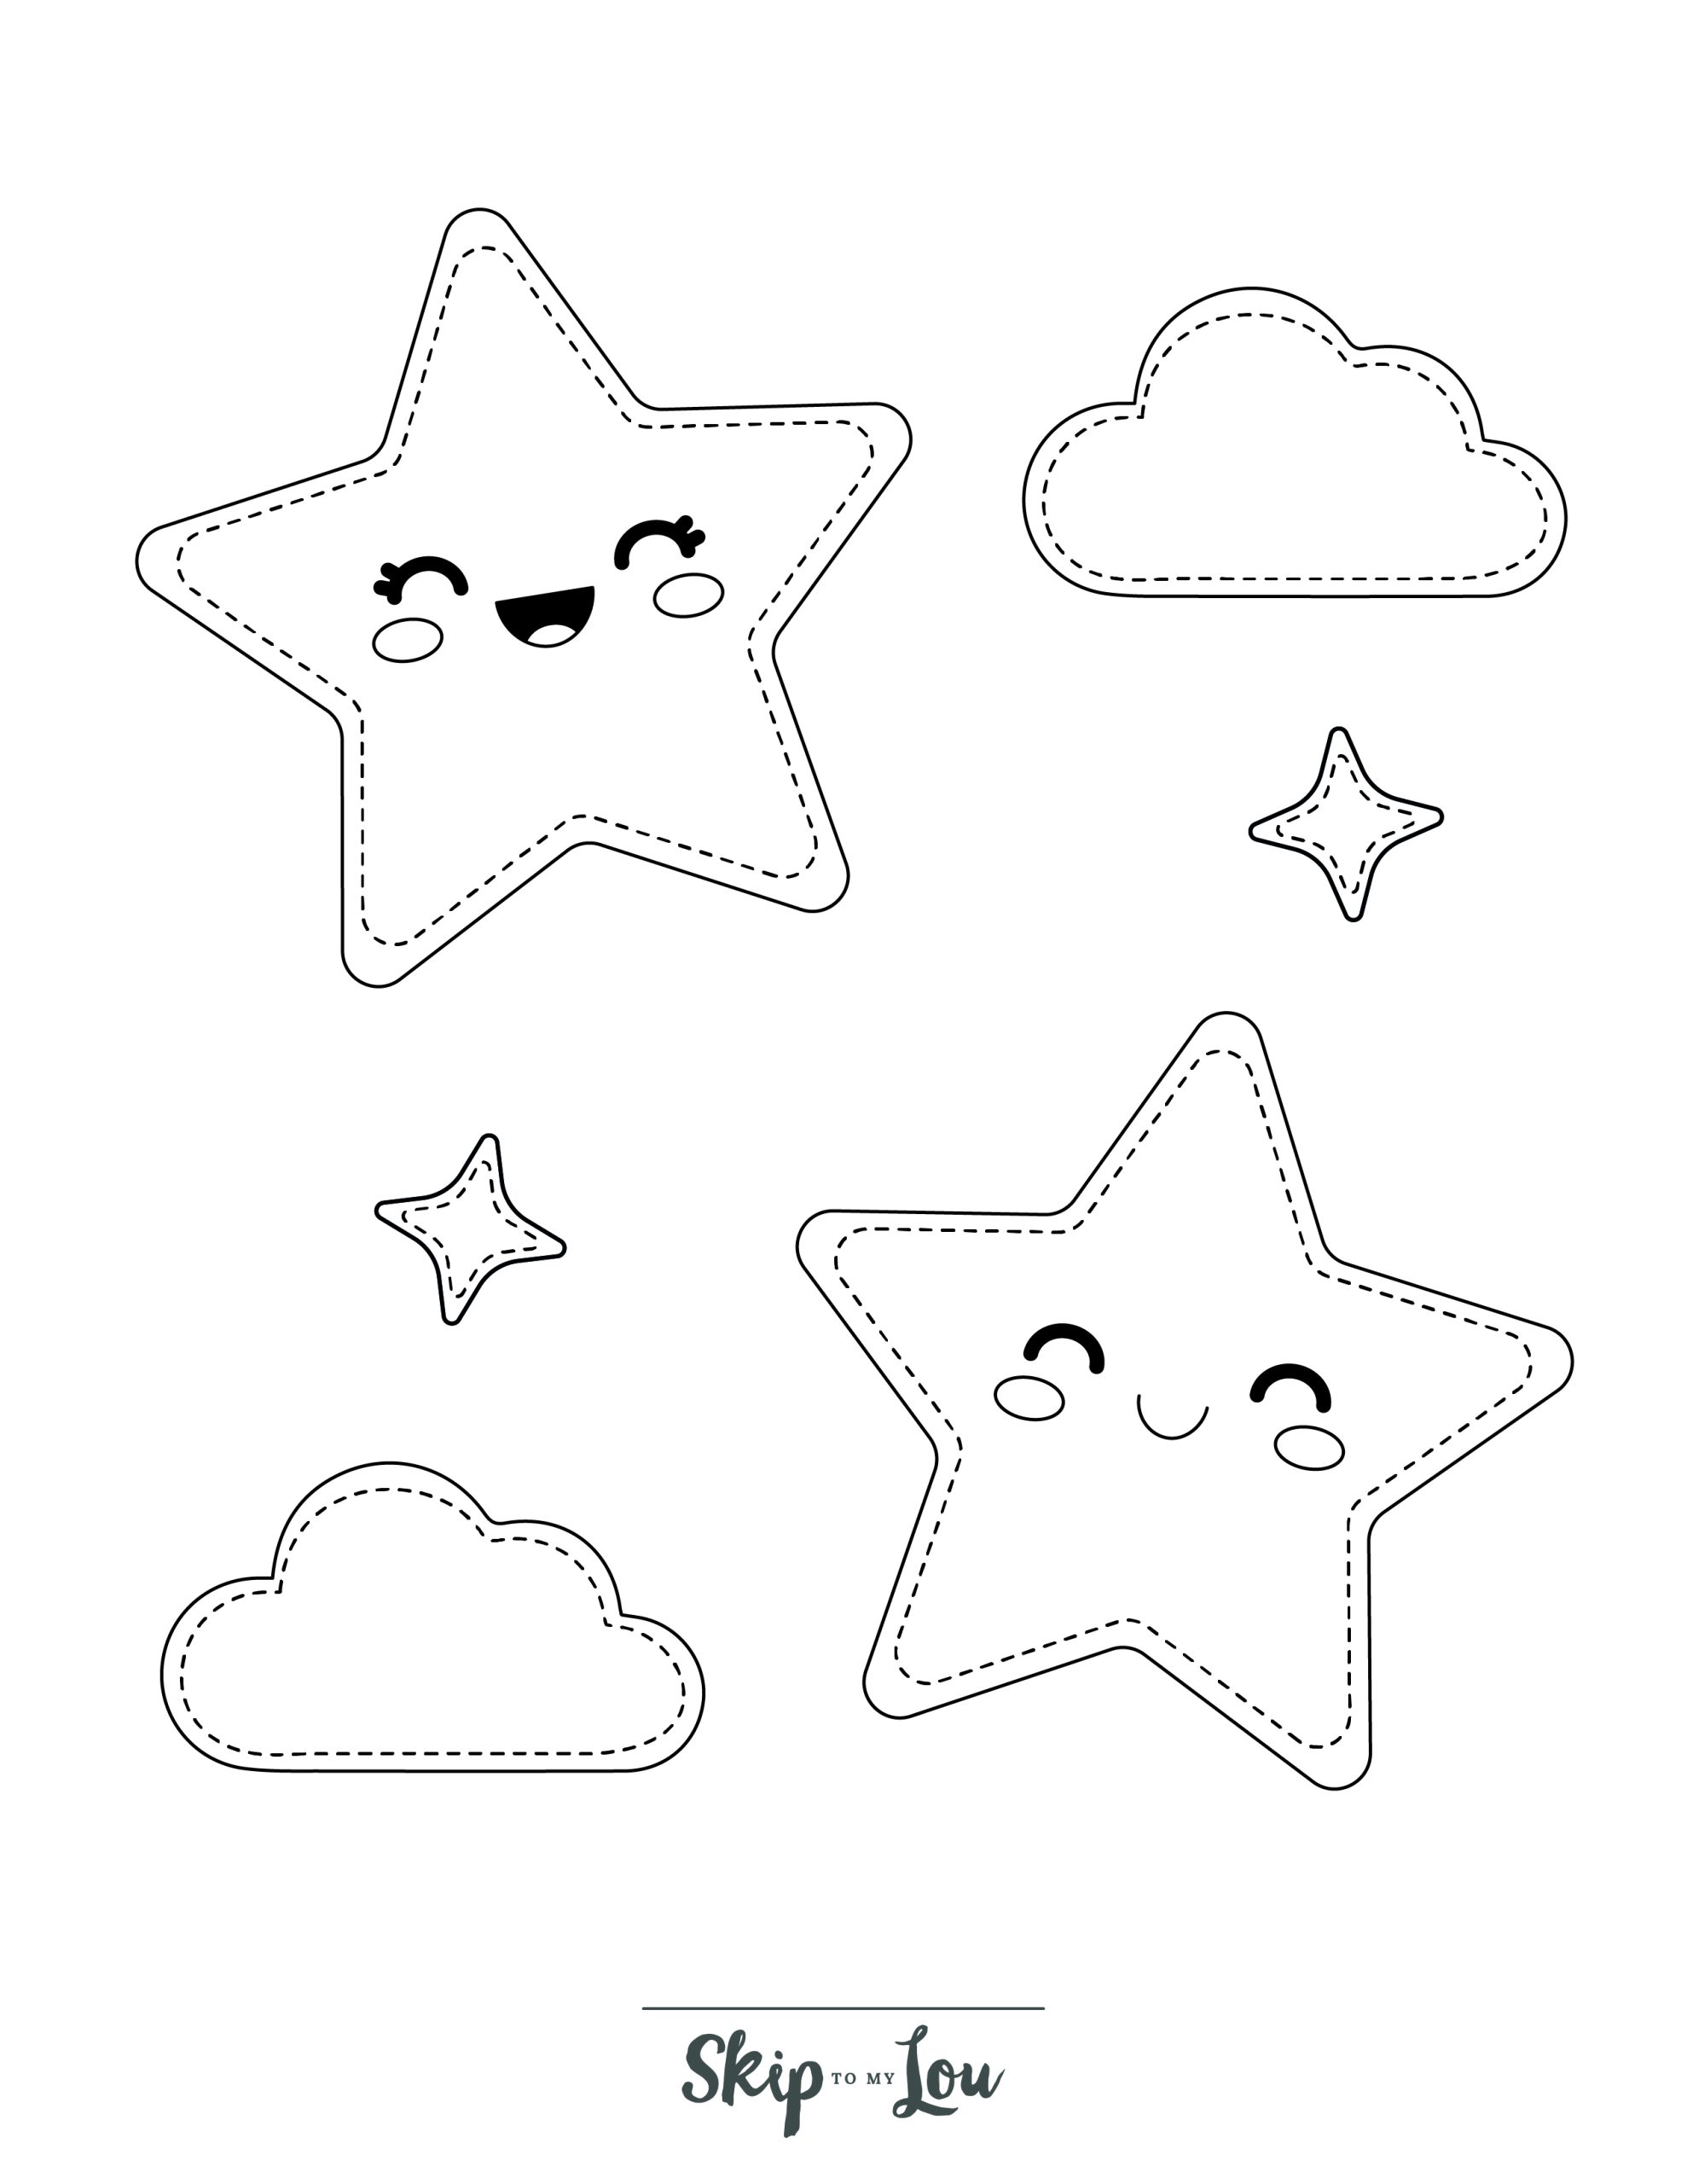 Star Coloring Page 12 - Line drawing of a cute stars in clouds